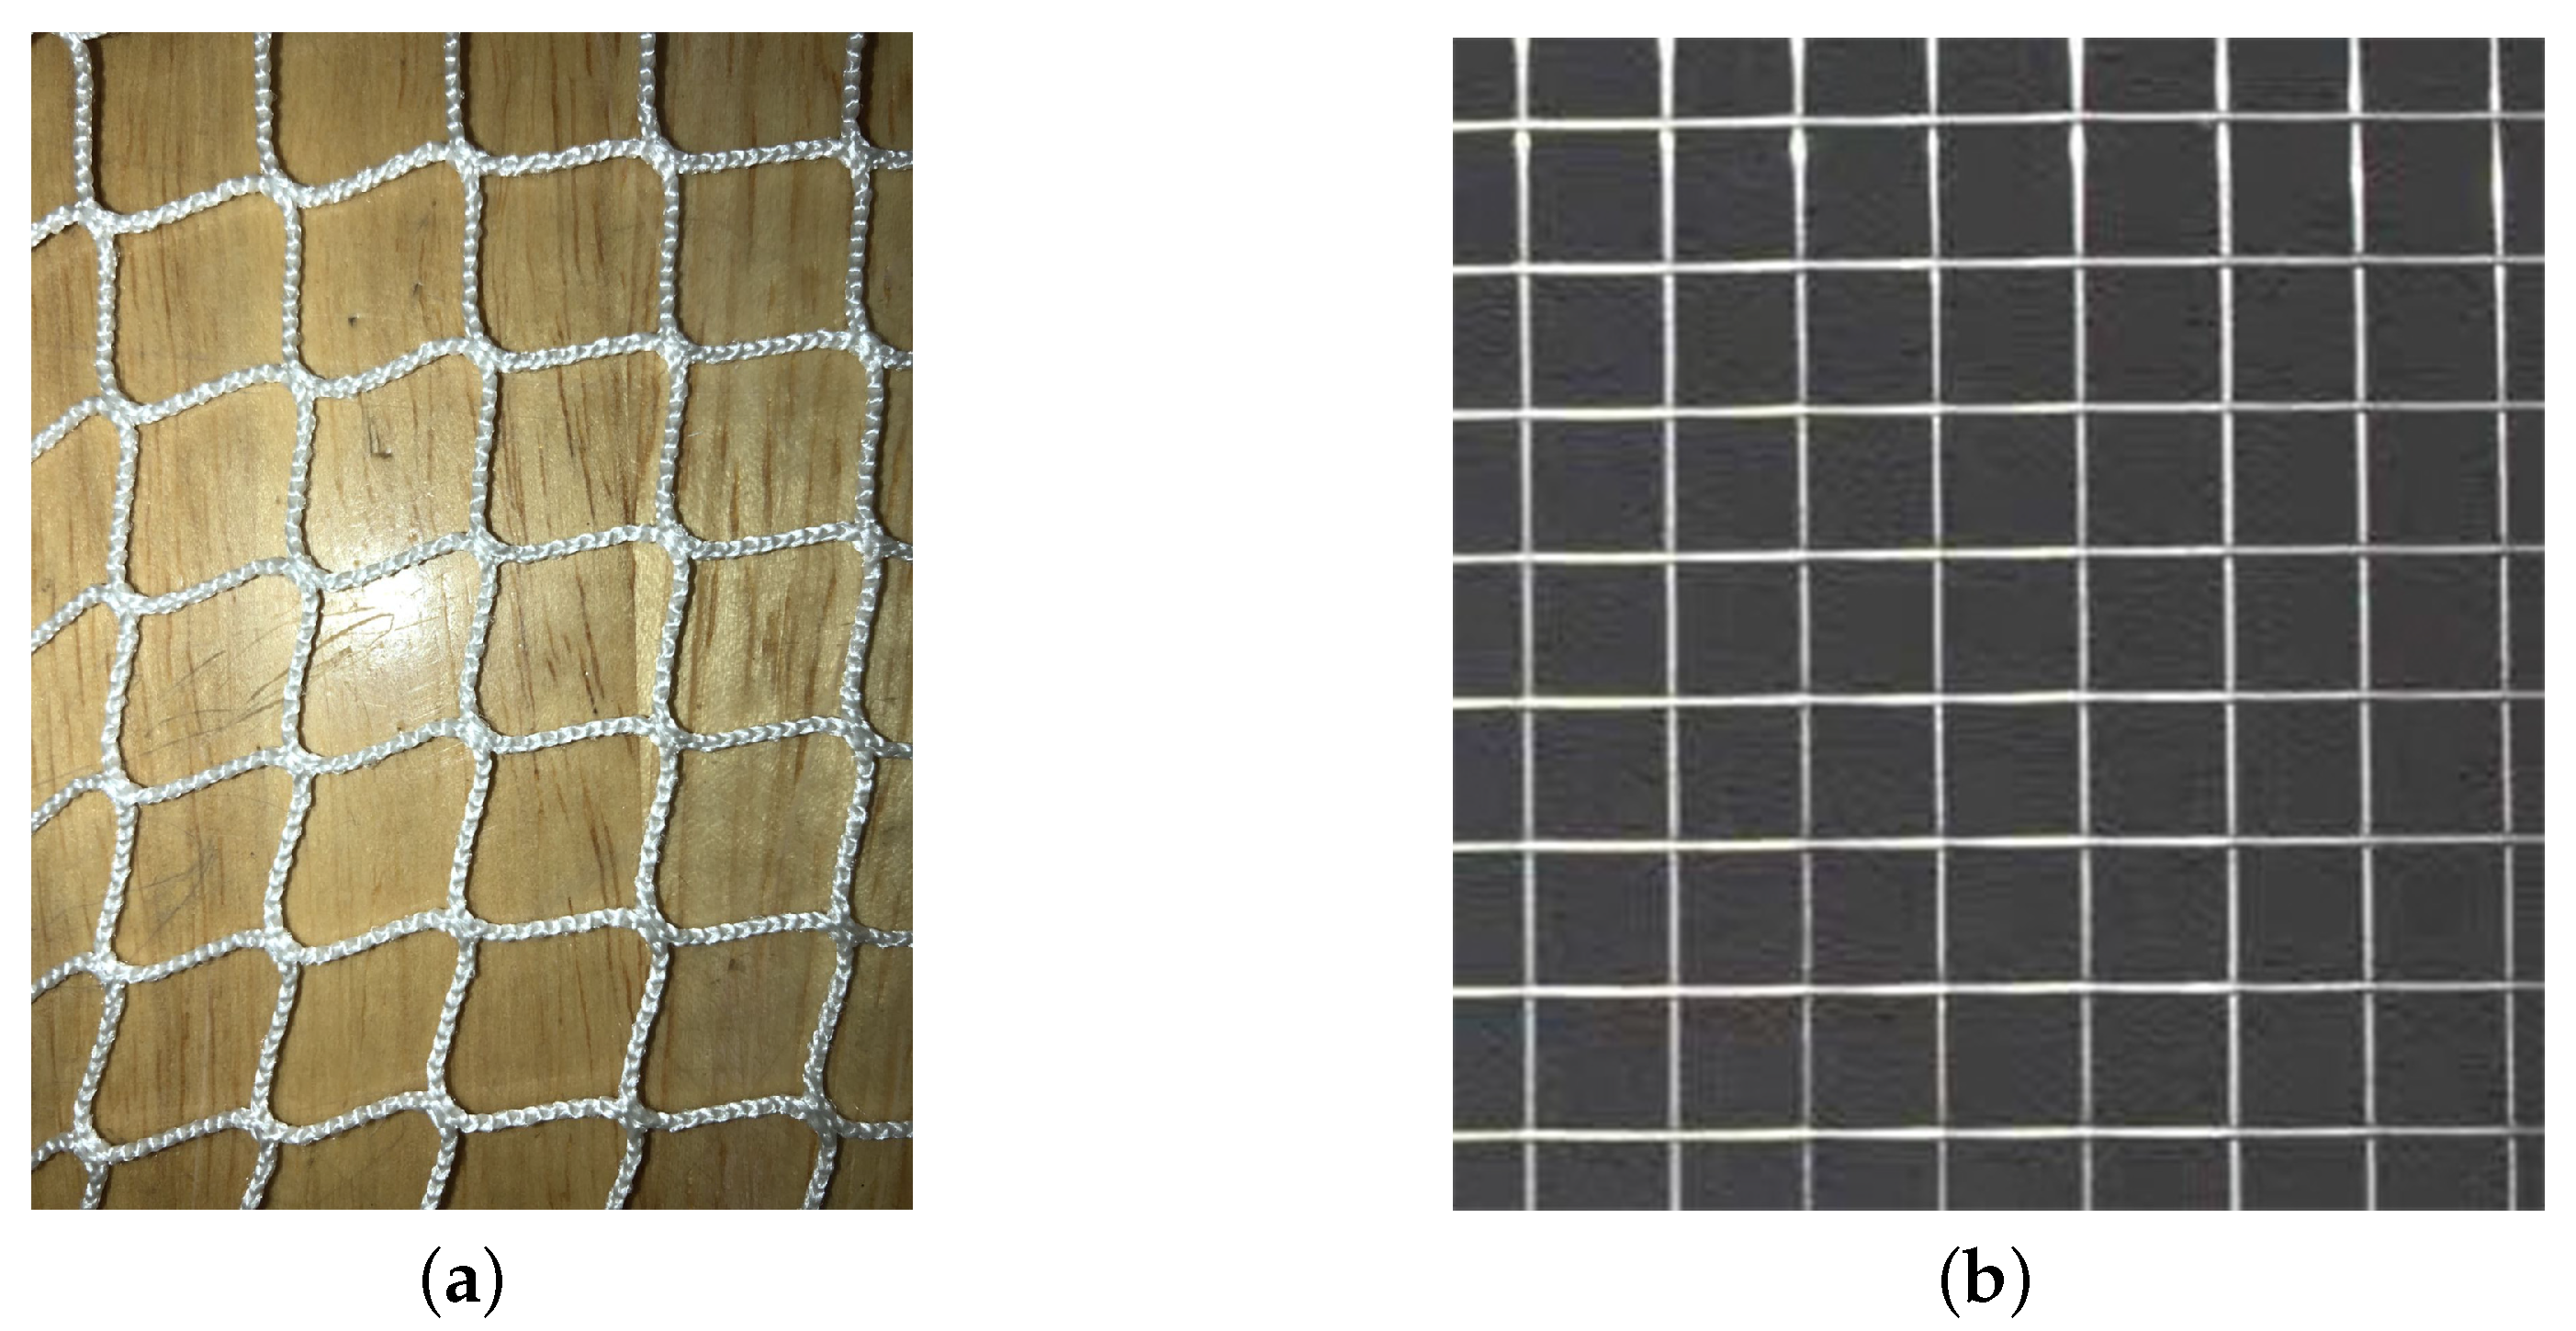 Buy Cast Nets - Prices/Models of Invi Series Cast Nets